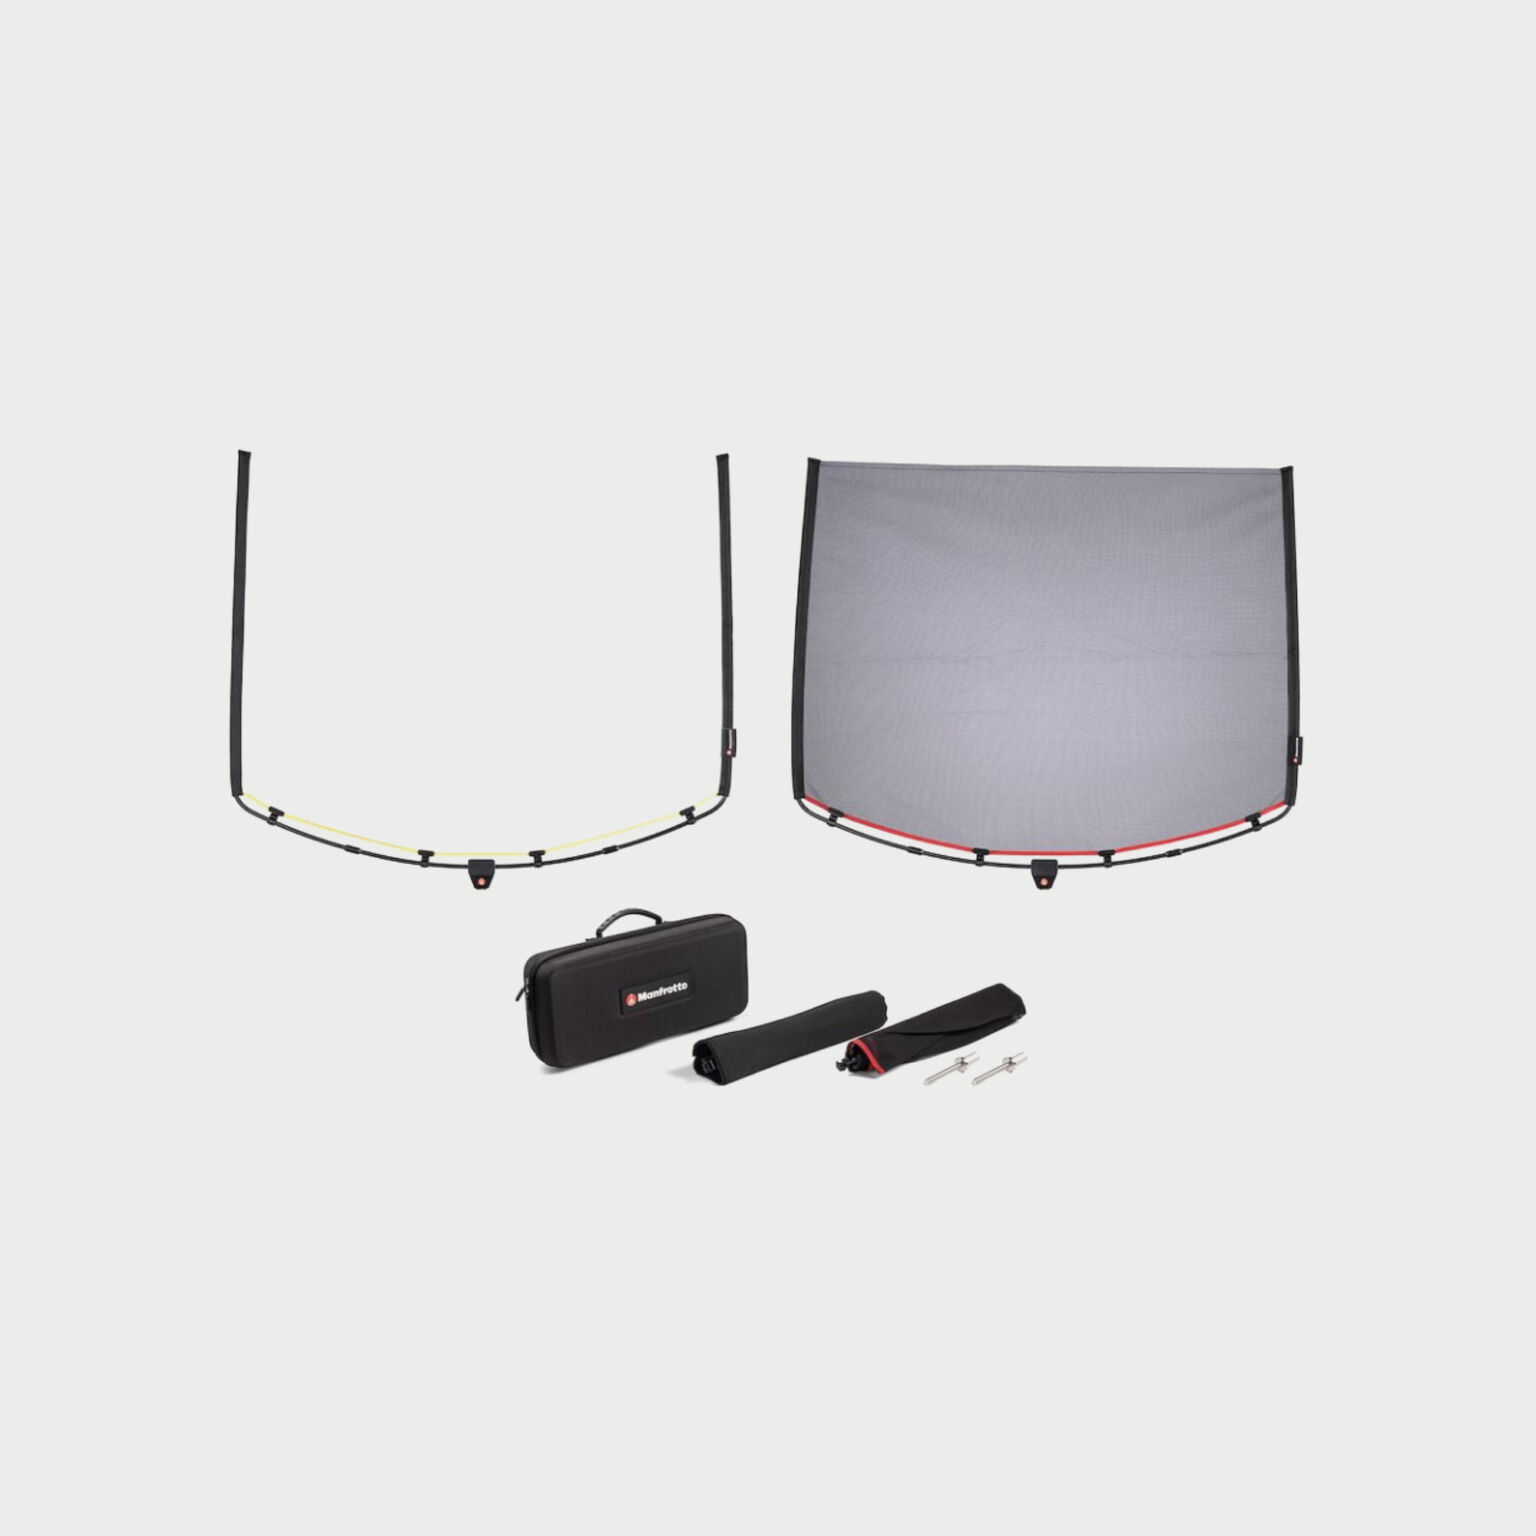 Manfrotto Rapid Flag 24x36 Kit